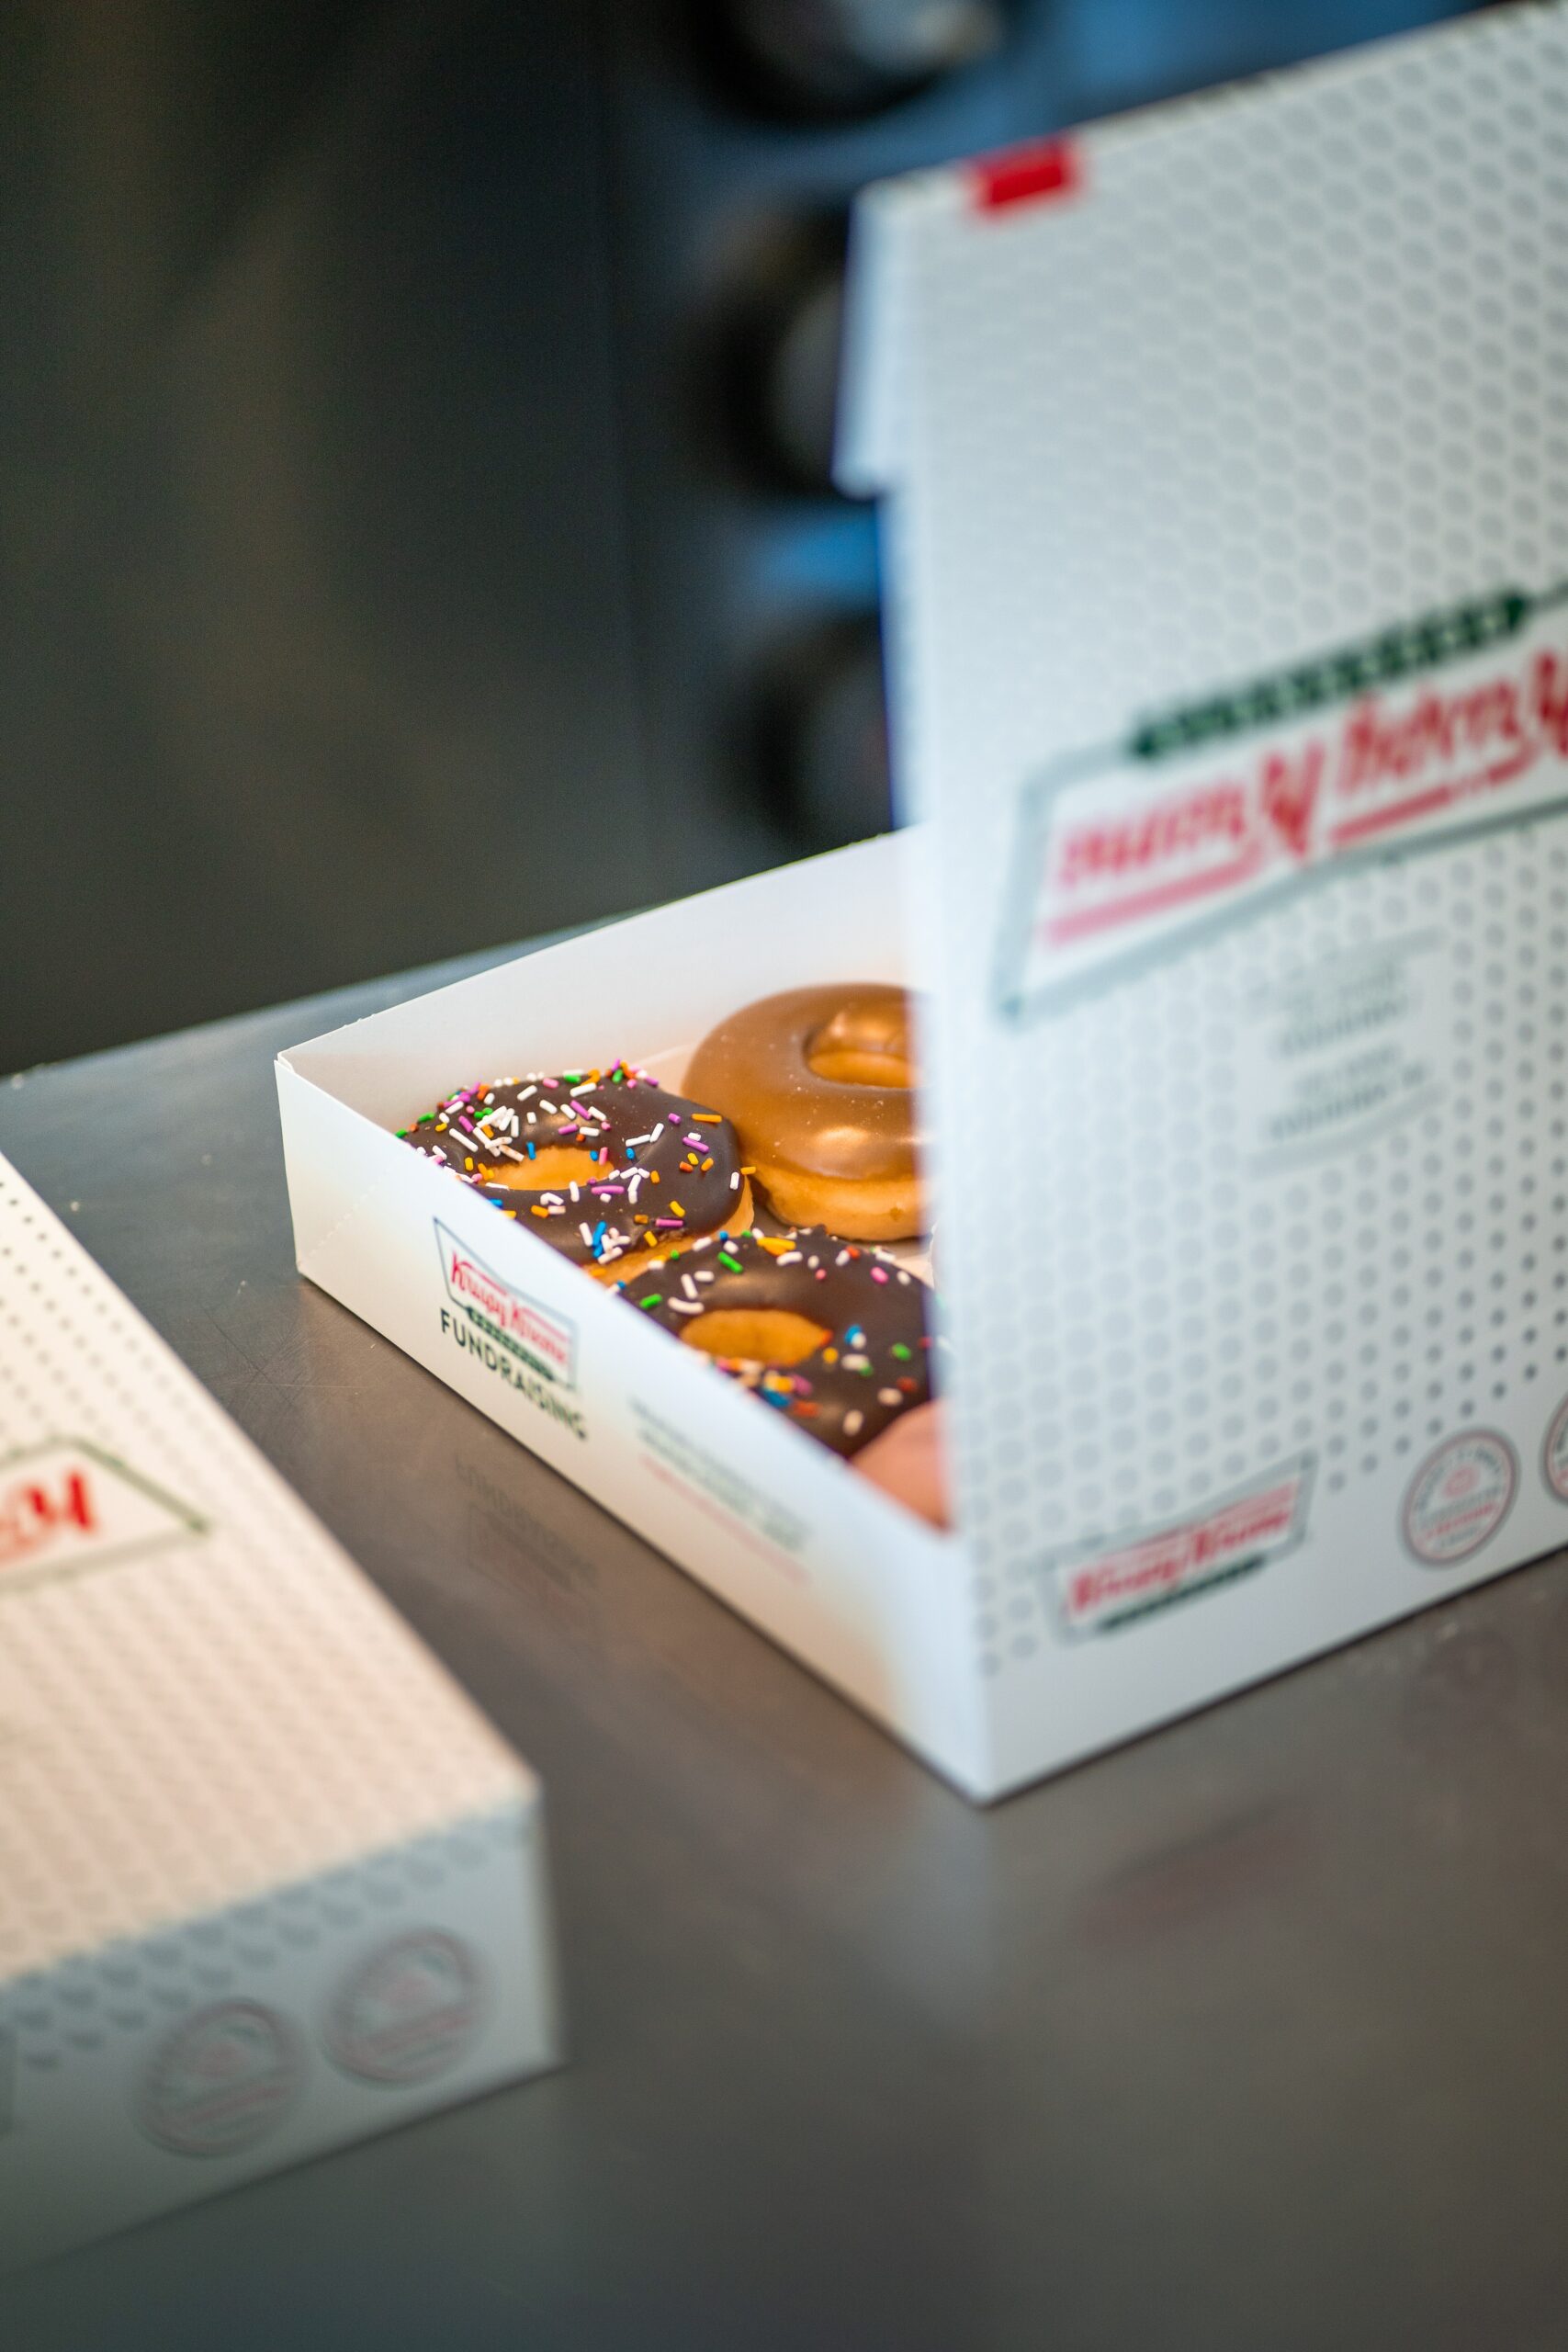 How to Find and Use Krispy Kreme Coupons A Comprehensive Guide